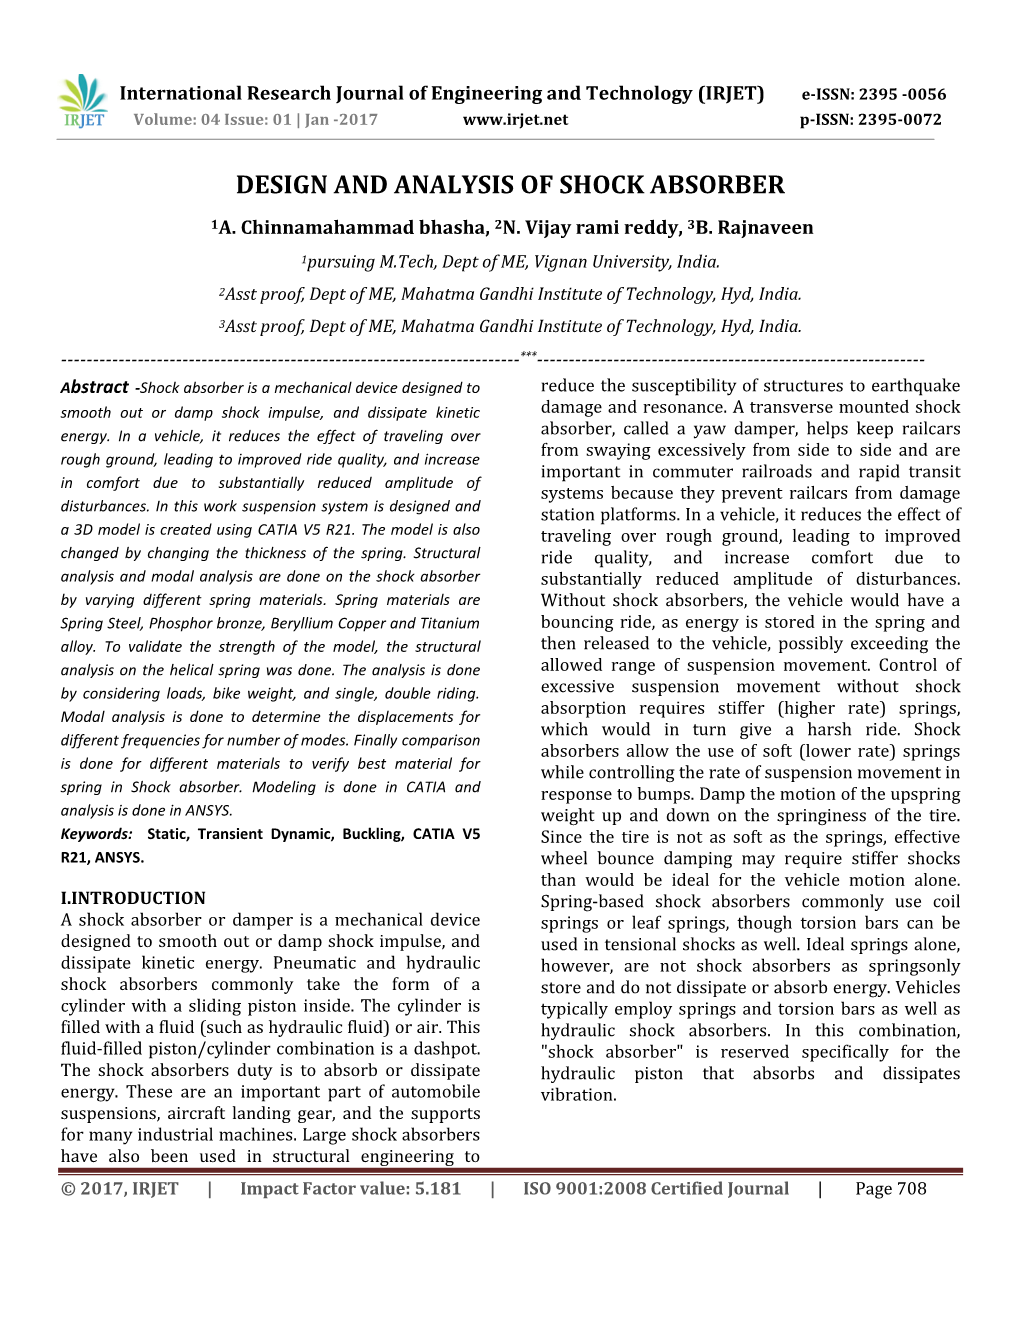 Design and Analysis of Shock Absorber 1A